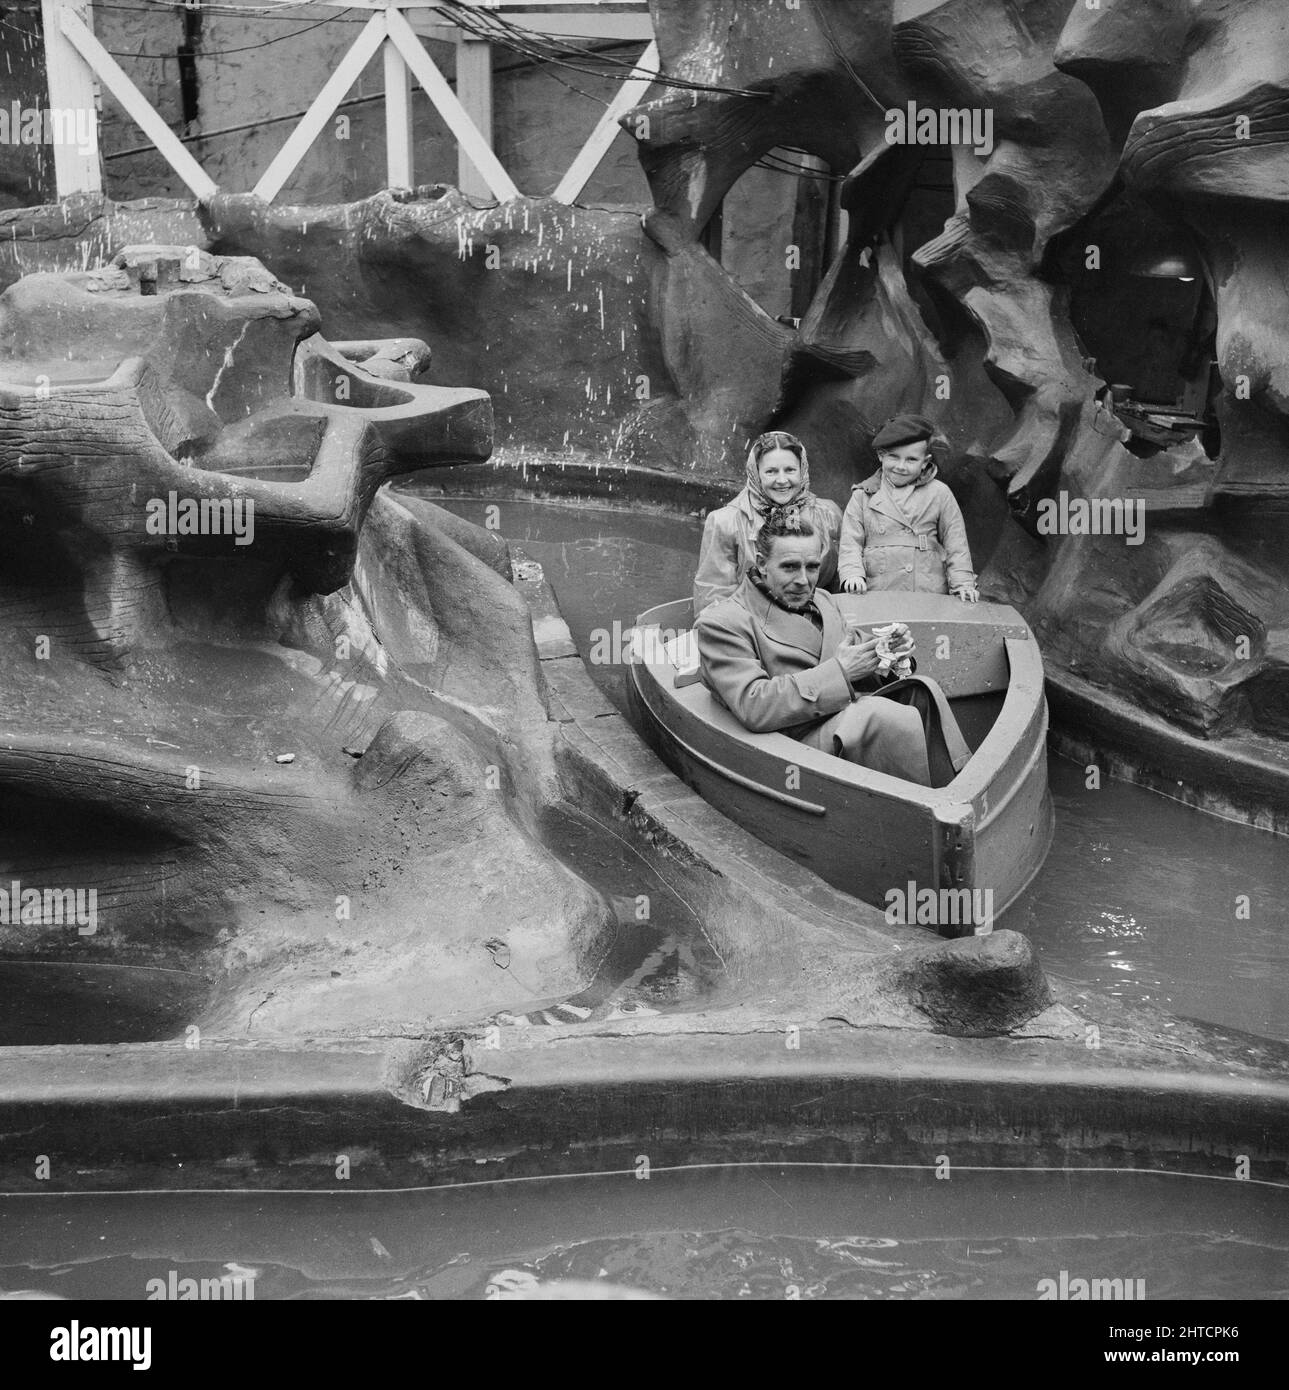 Skegness, East Lindsey, Lincolnshire, 22/05/1954. A couple and a young boy in a boat on a water ride during a Laing staff day trip to Skegness. In 1947, after a seven year break, Laing had resurrected their 'Area Outings' for staff and their families, with trips taking place in May and June. In 1954, there were seven outings planned to take place over five weeks in May and June. This trip to Skegness was for employees and their families from the Midlands and South Yorkshire. Stock Photo